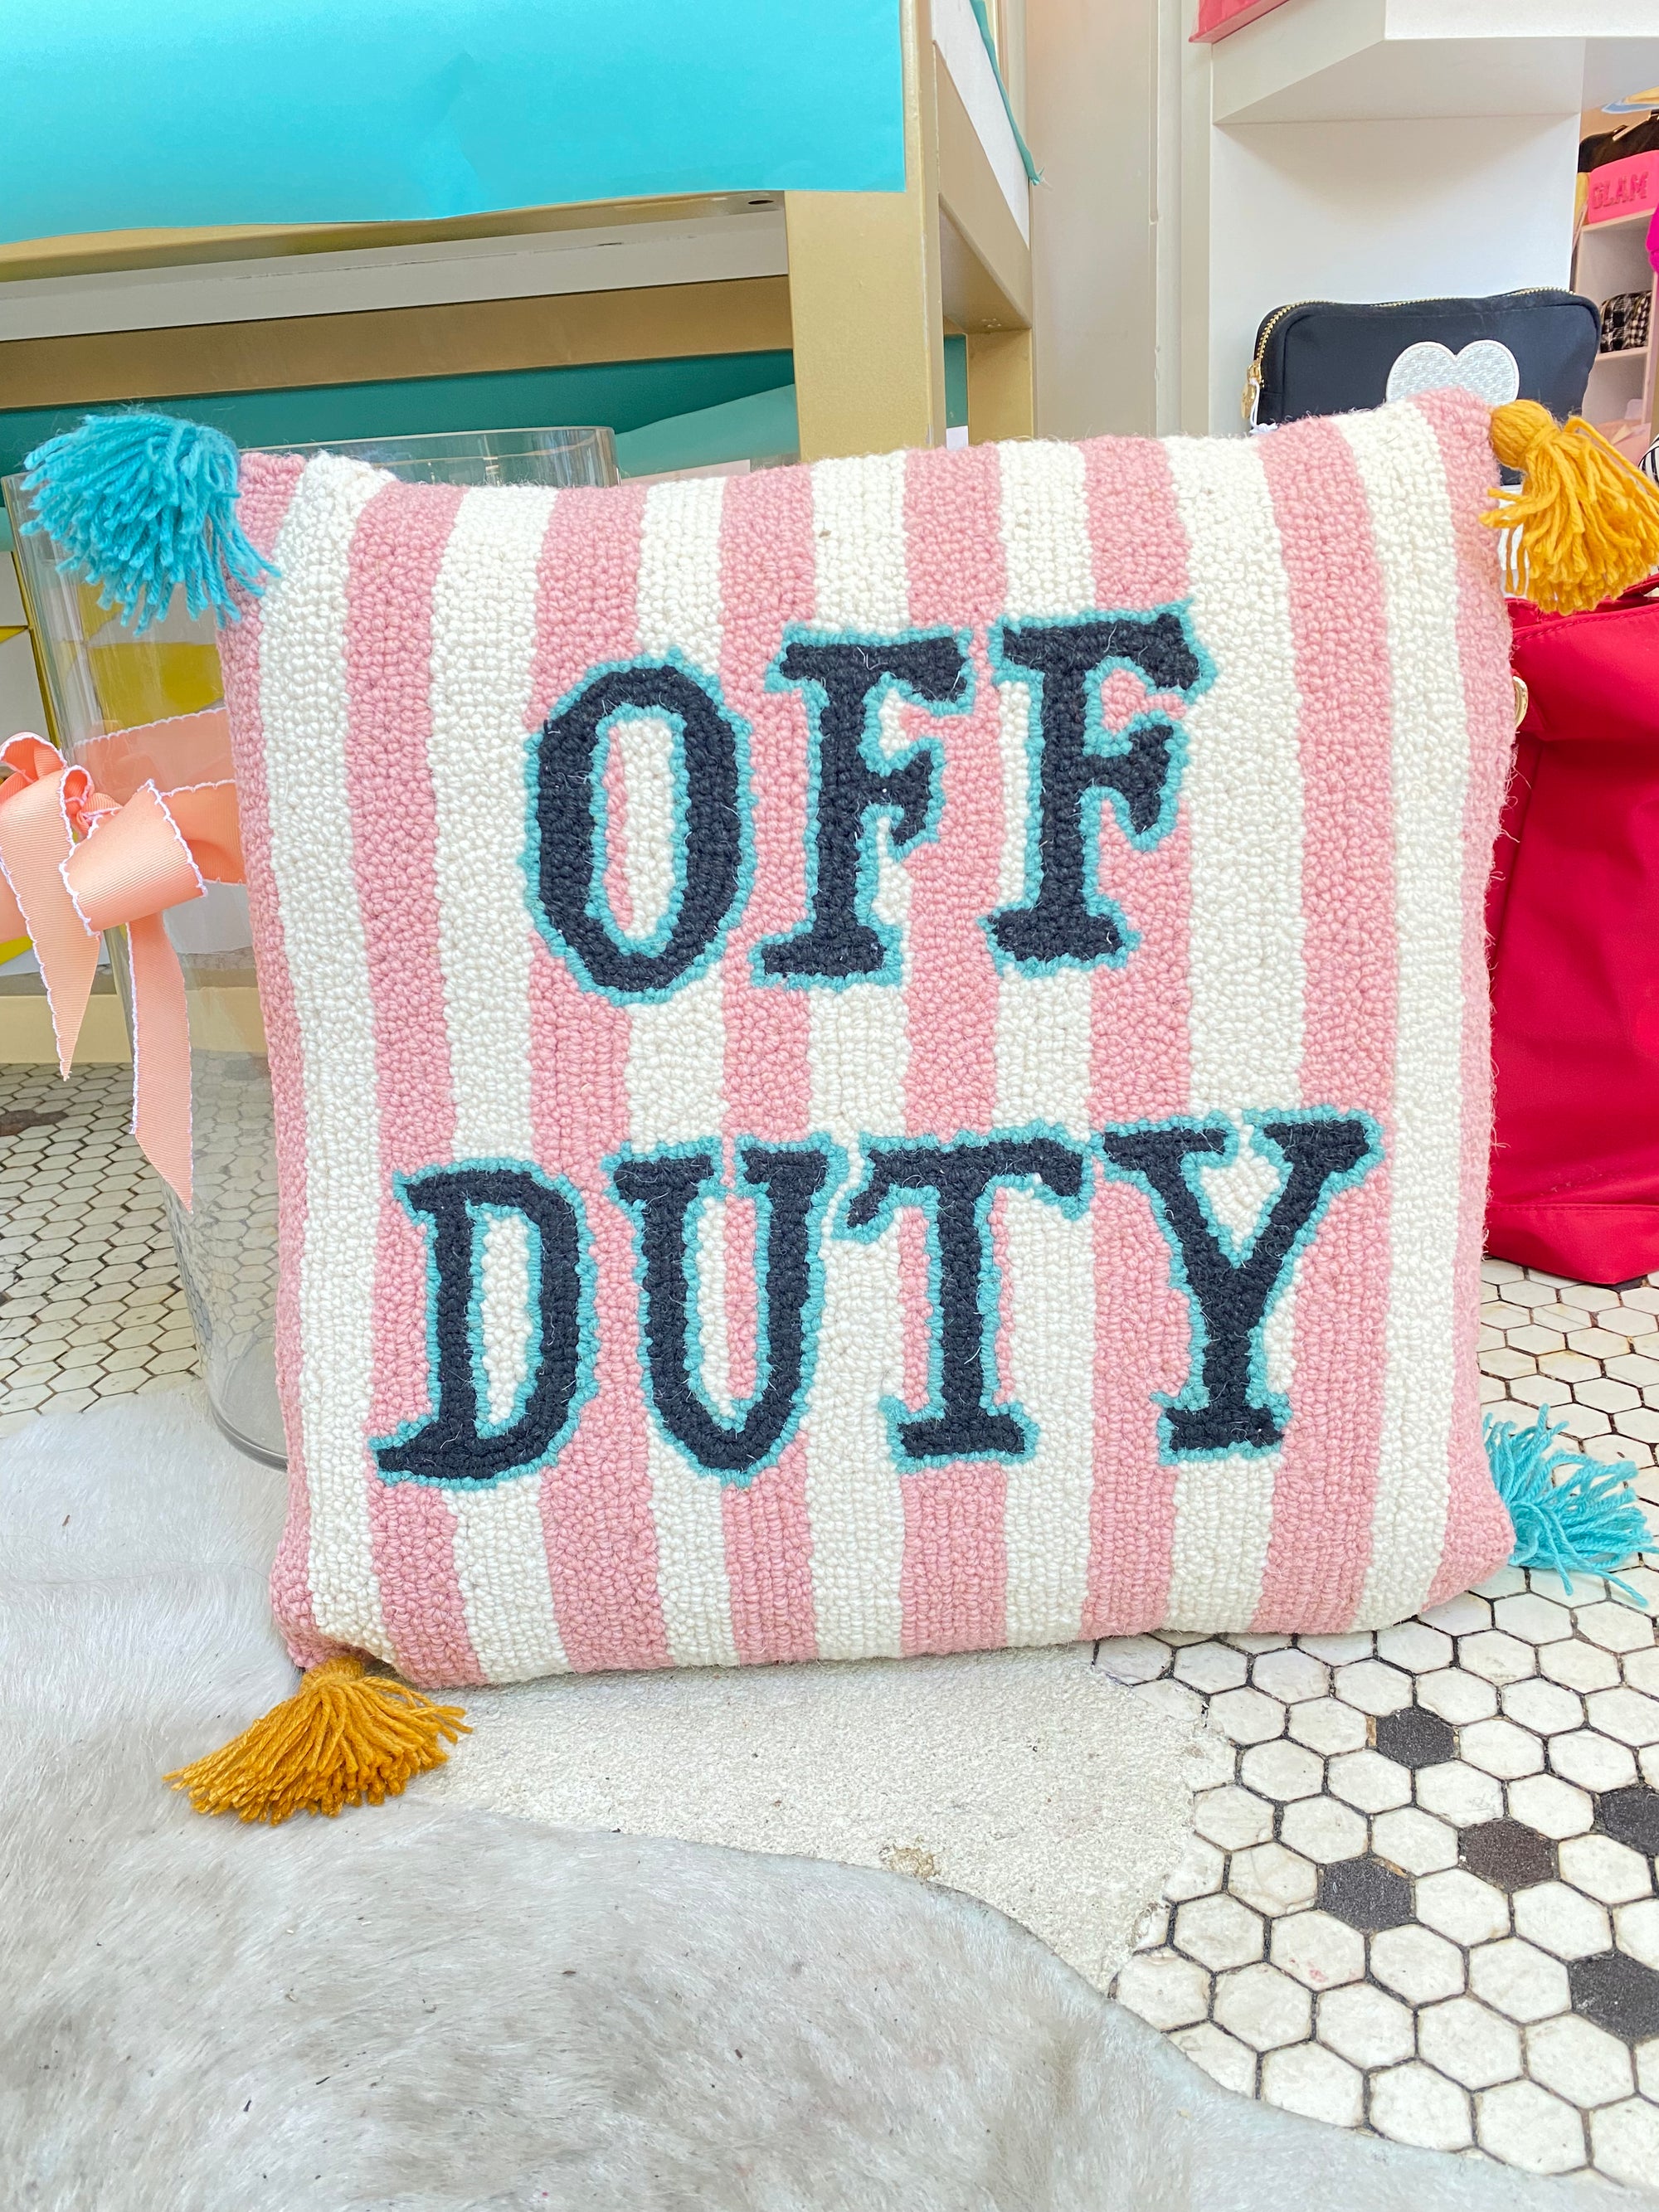 Off Duty with Tassels Hook Pillow